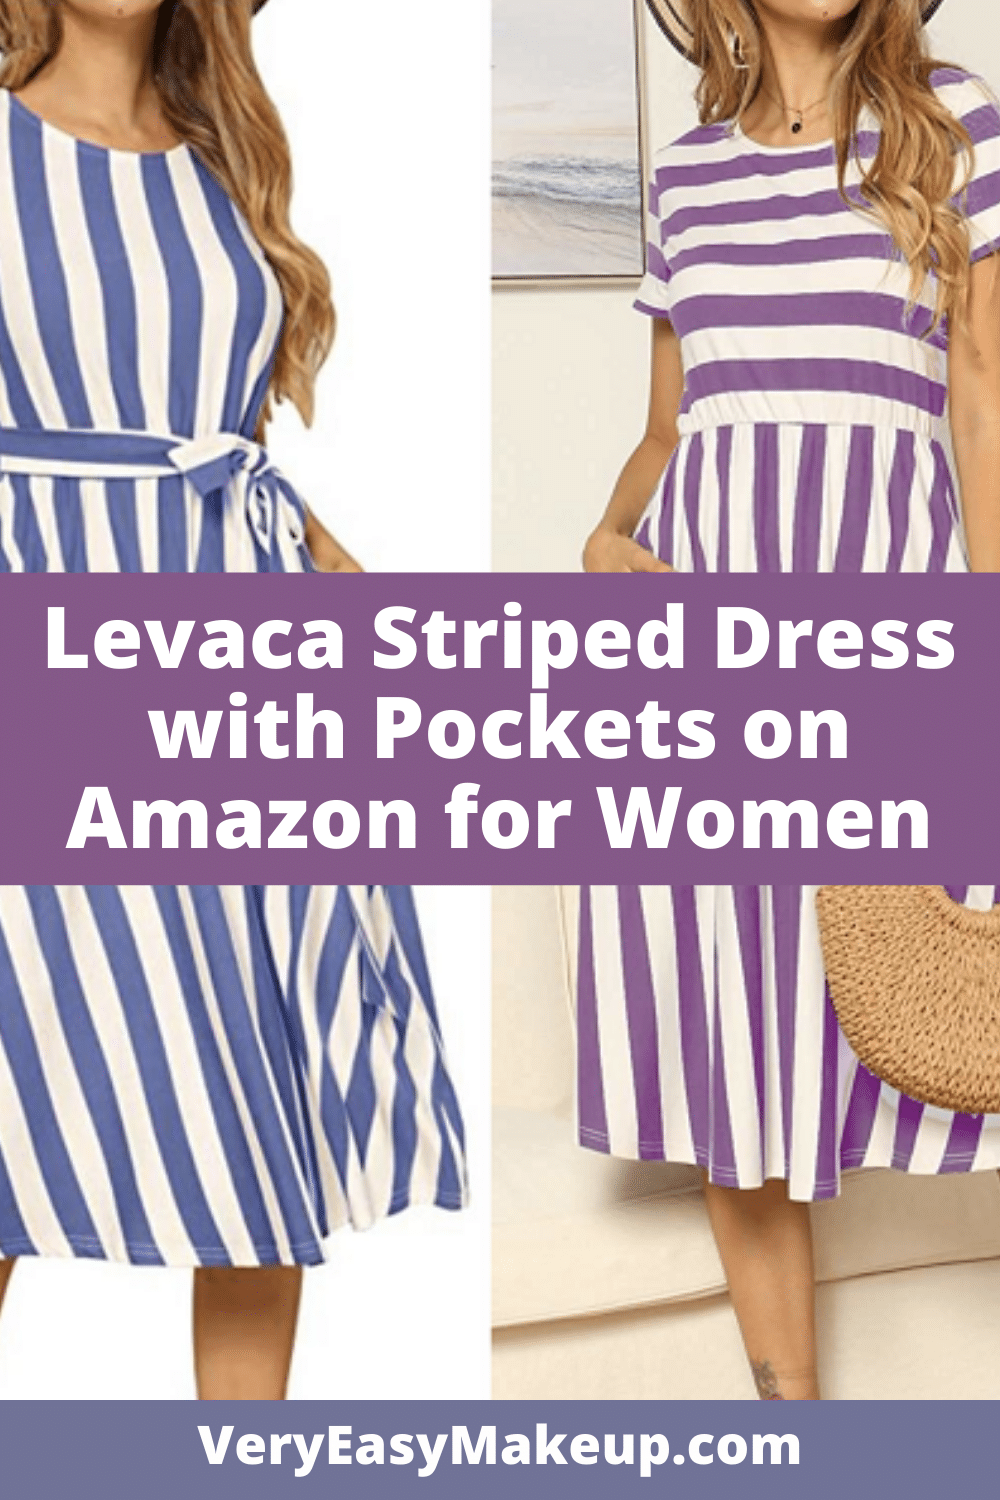 Levaca Striped Dress with Pockets for Women on Amazon by Very Easy Makeup